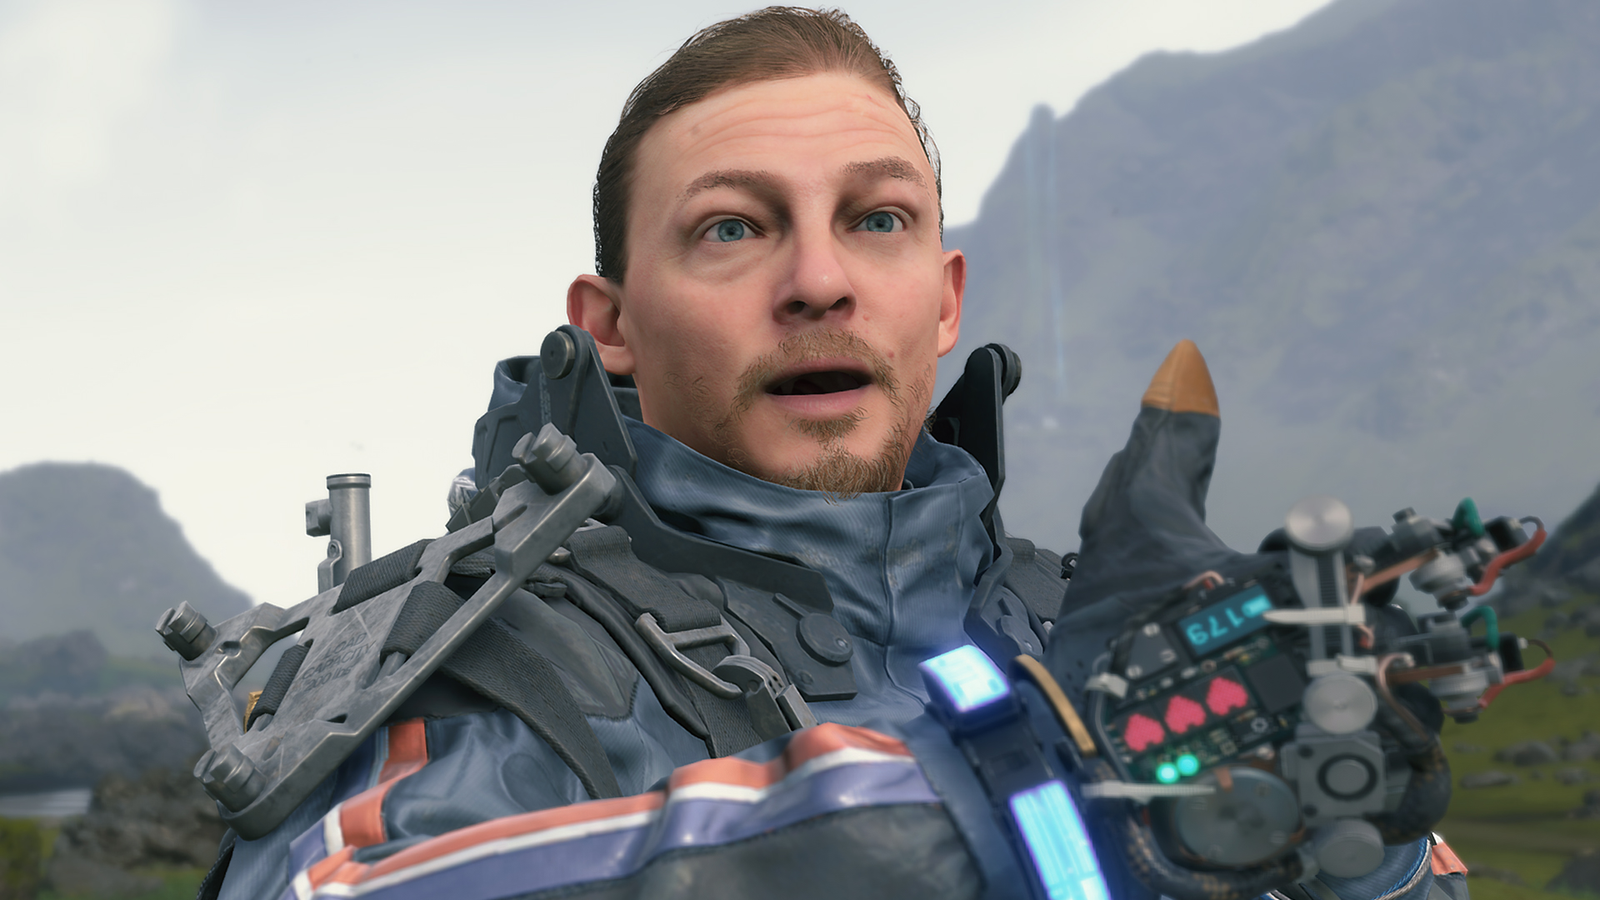 Death Stranding for PC review: Is this the definitive version of the game?